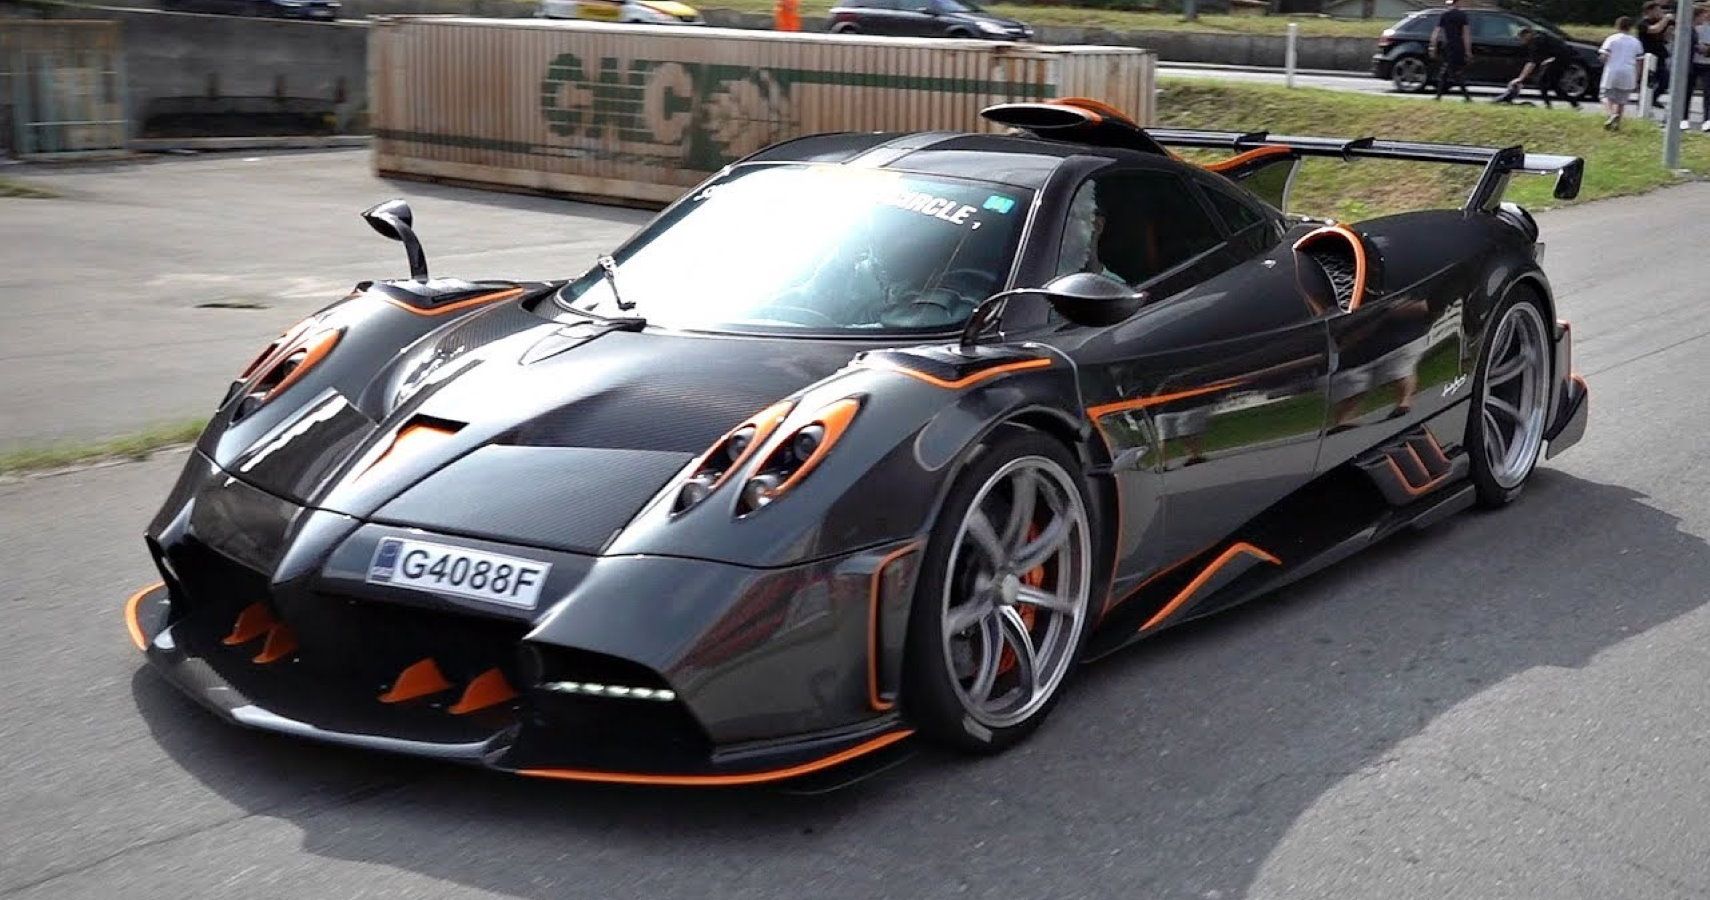 Special Edition Pagani Huayra Imola Seen For The First Time